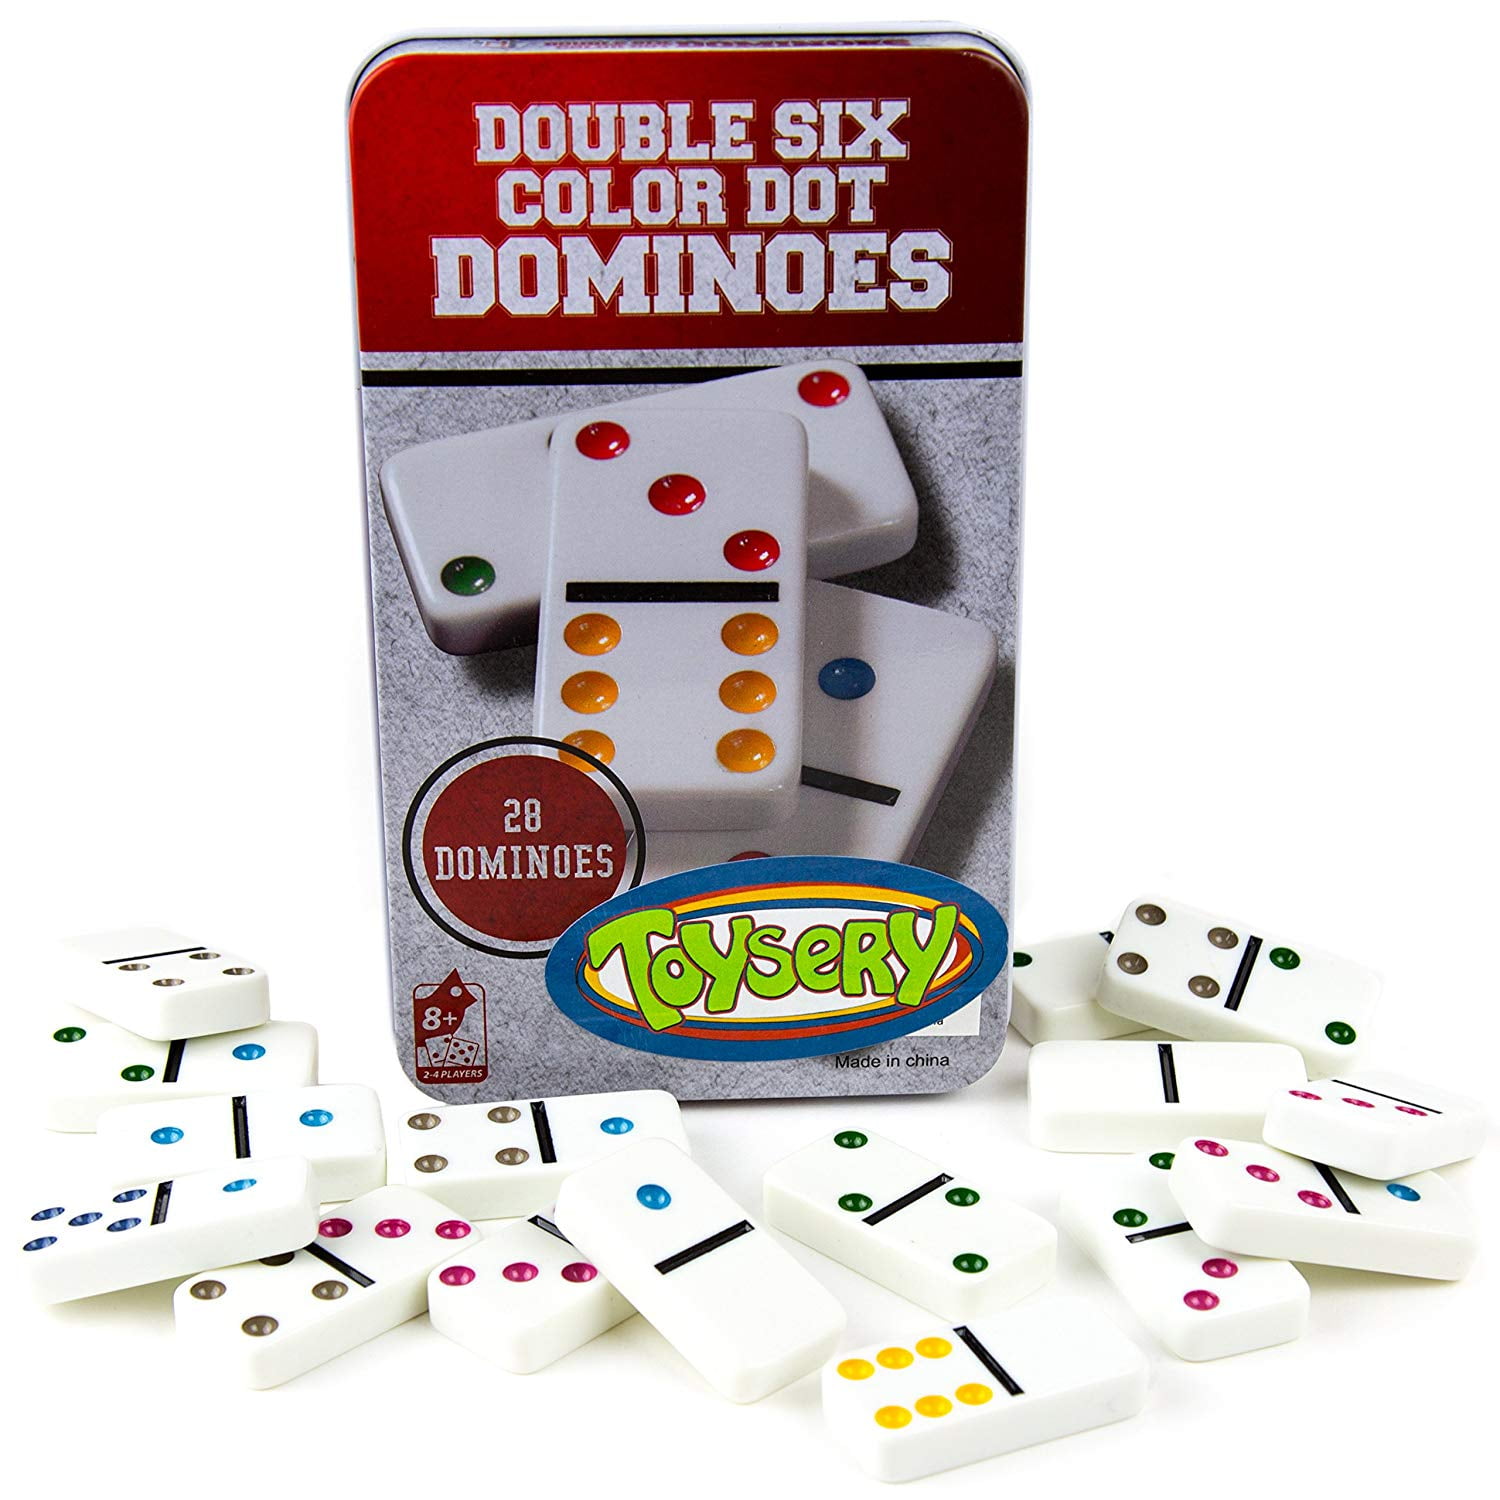 Double Six Color Dot Dominoes 28 Dominoes Double 6 Dominoes Set Game in Tin Box 